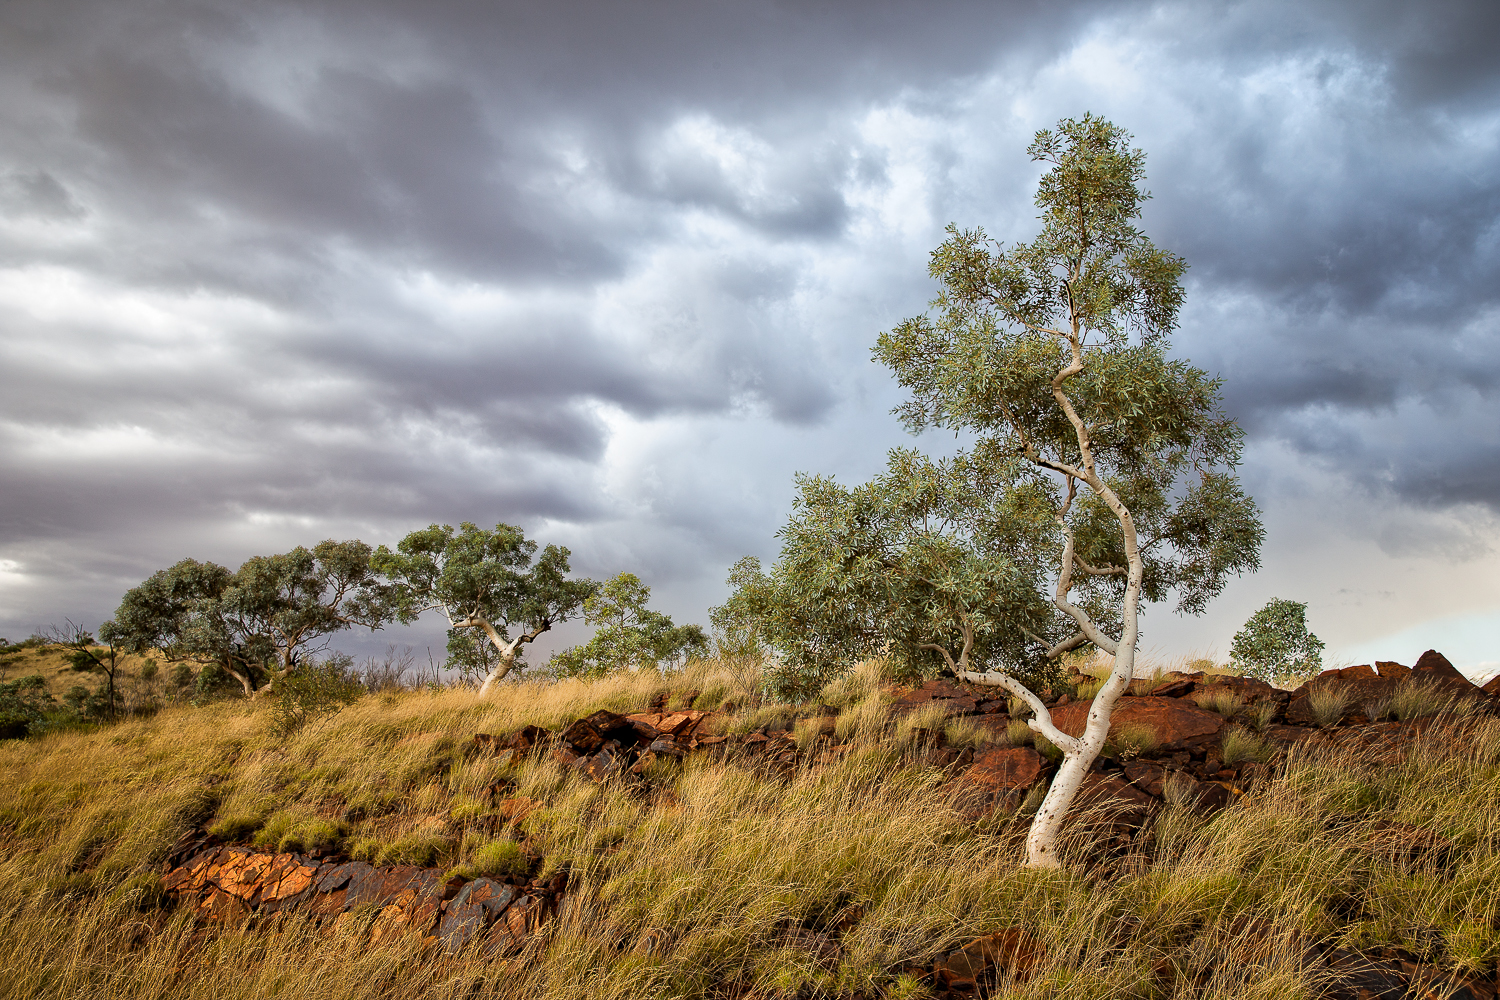 Brewing Storm in the Outback